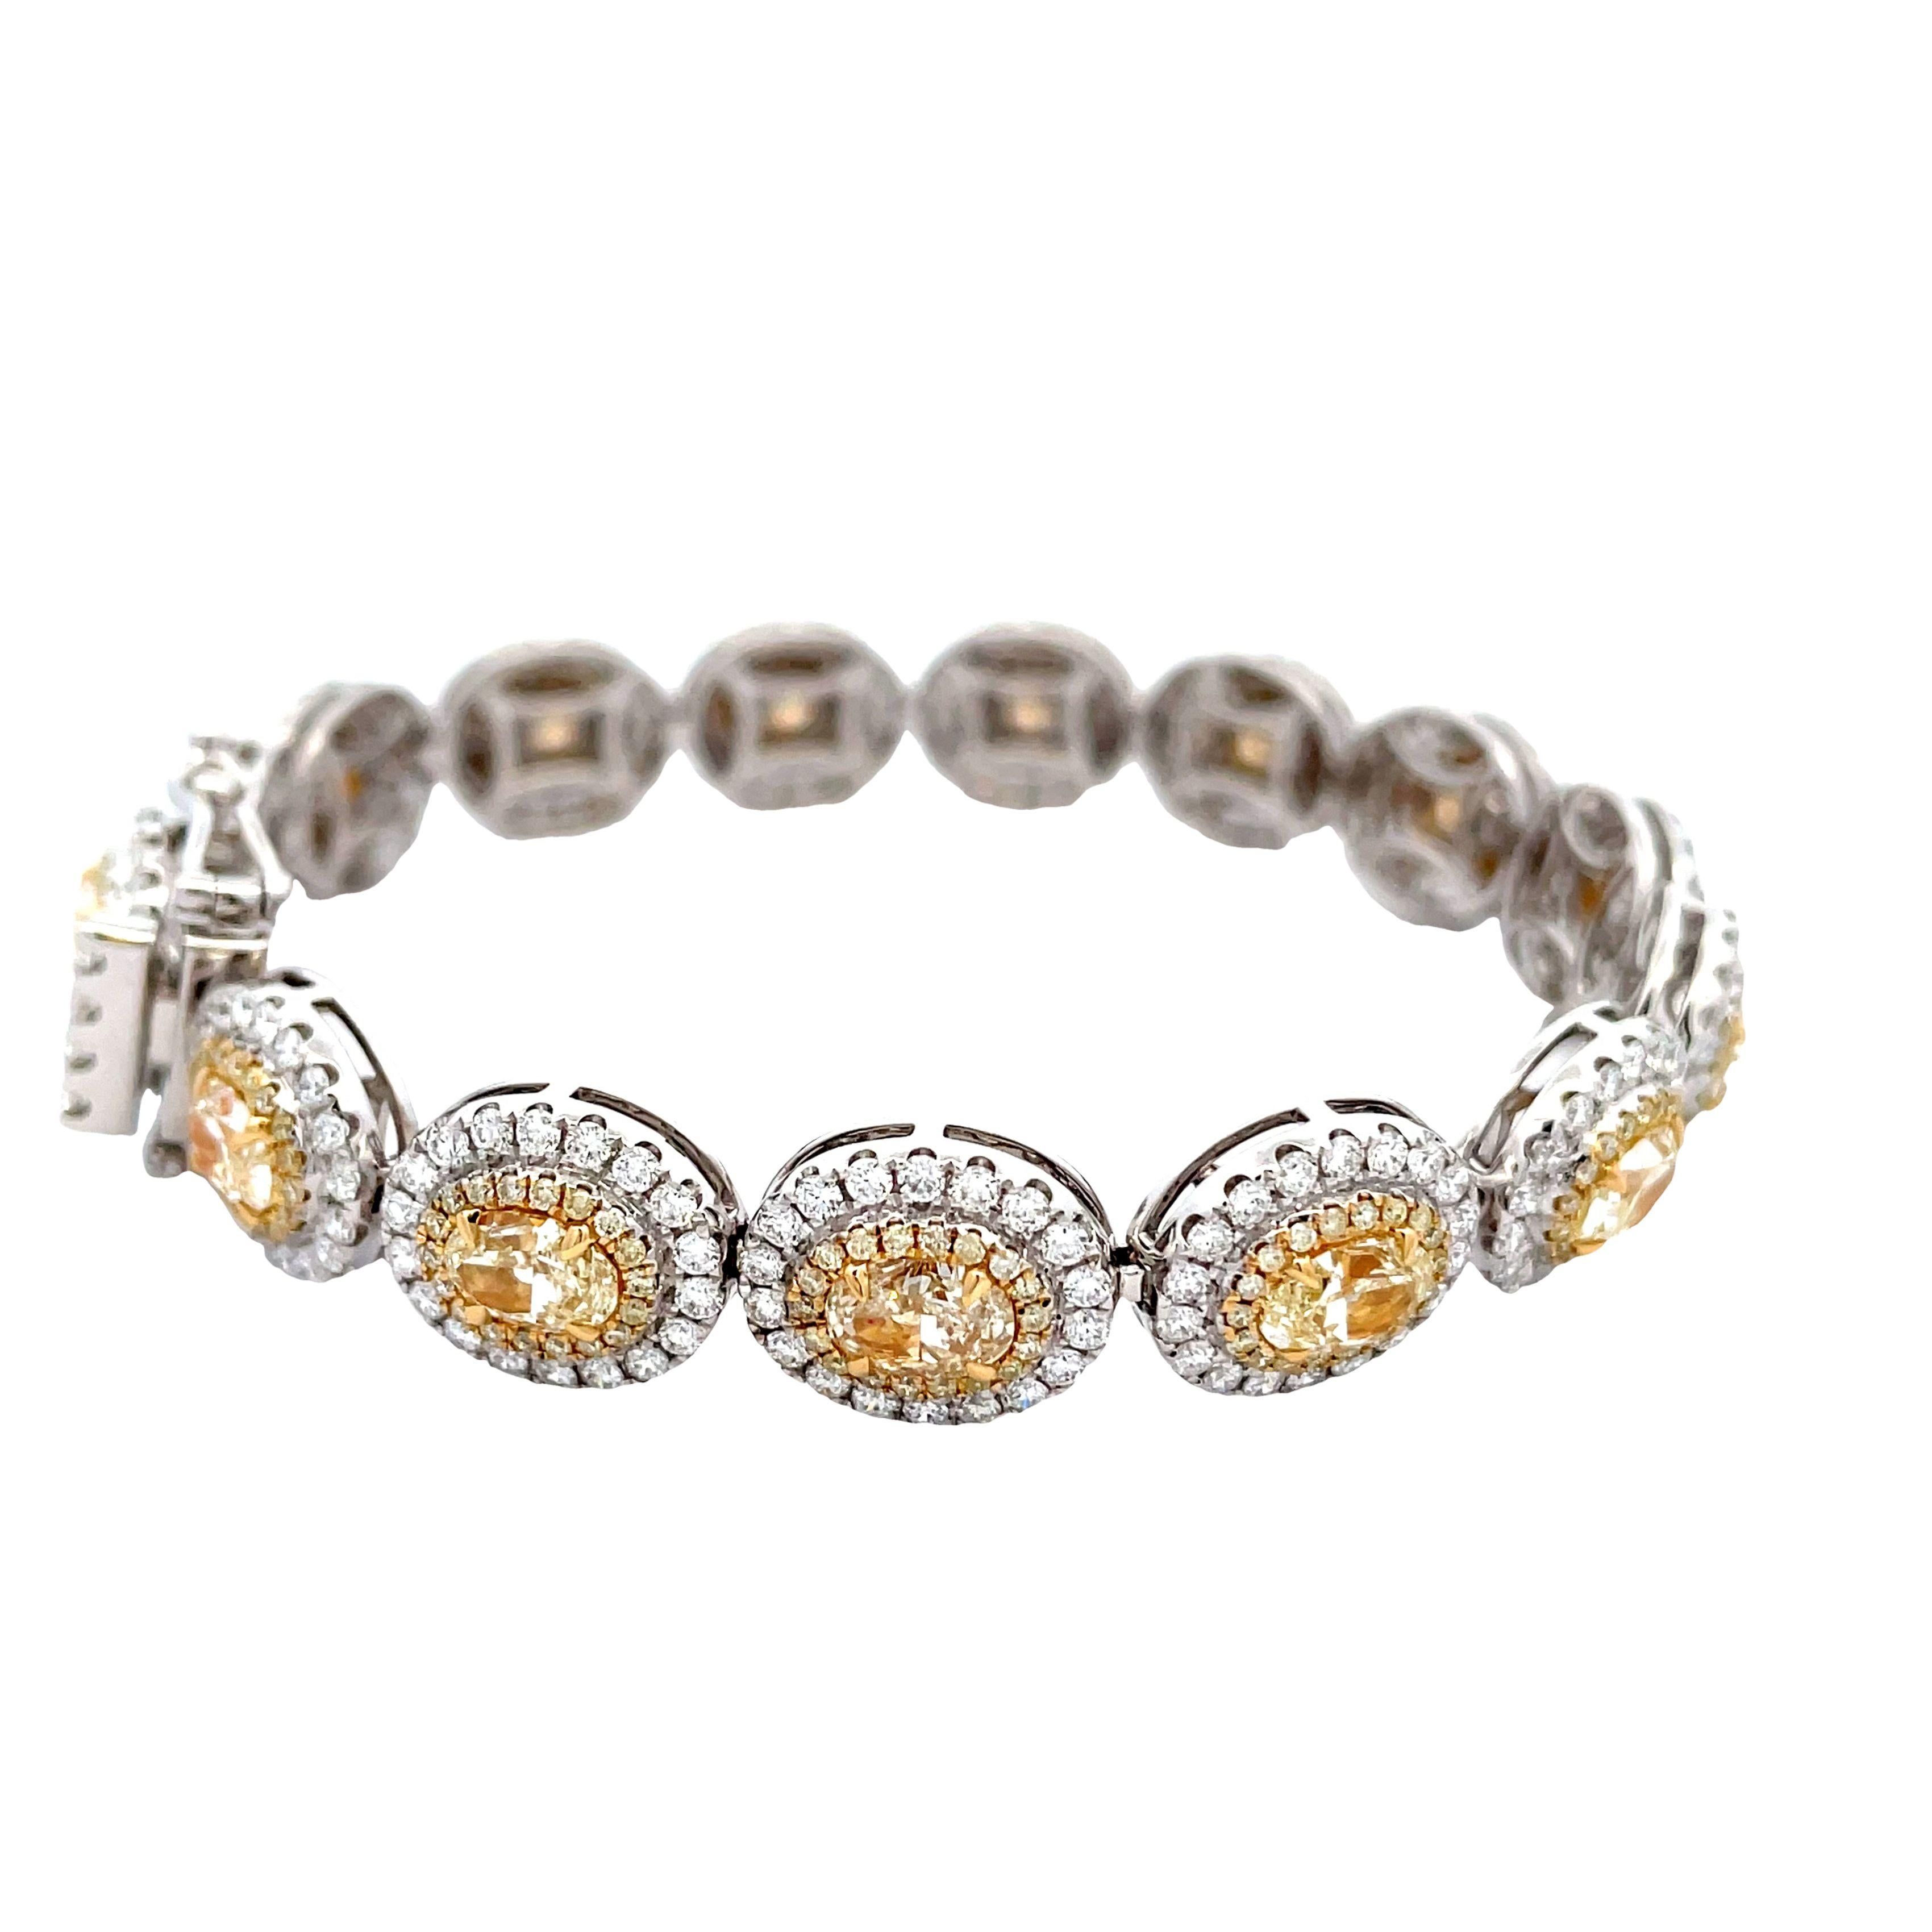   3.51 CT White Diamond Round 9.51 CT Yellow Diamond (MIX SHAPE) 18KY/W Bracelet In New Condition For Sale In New York, NY